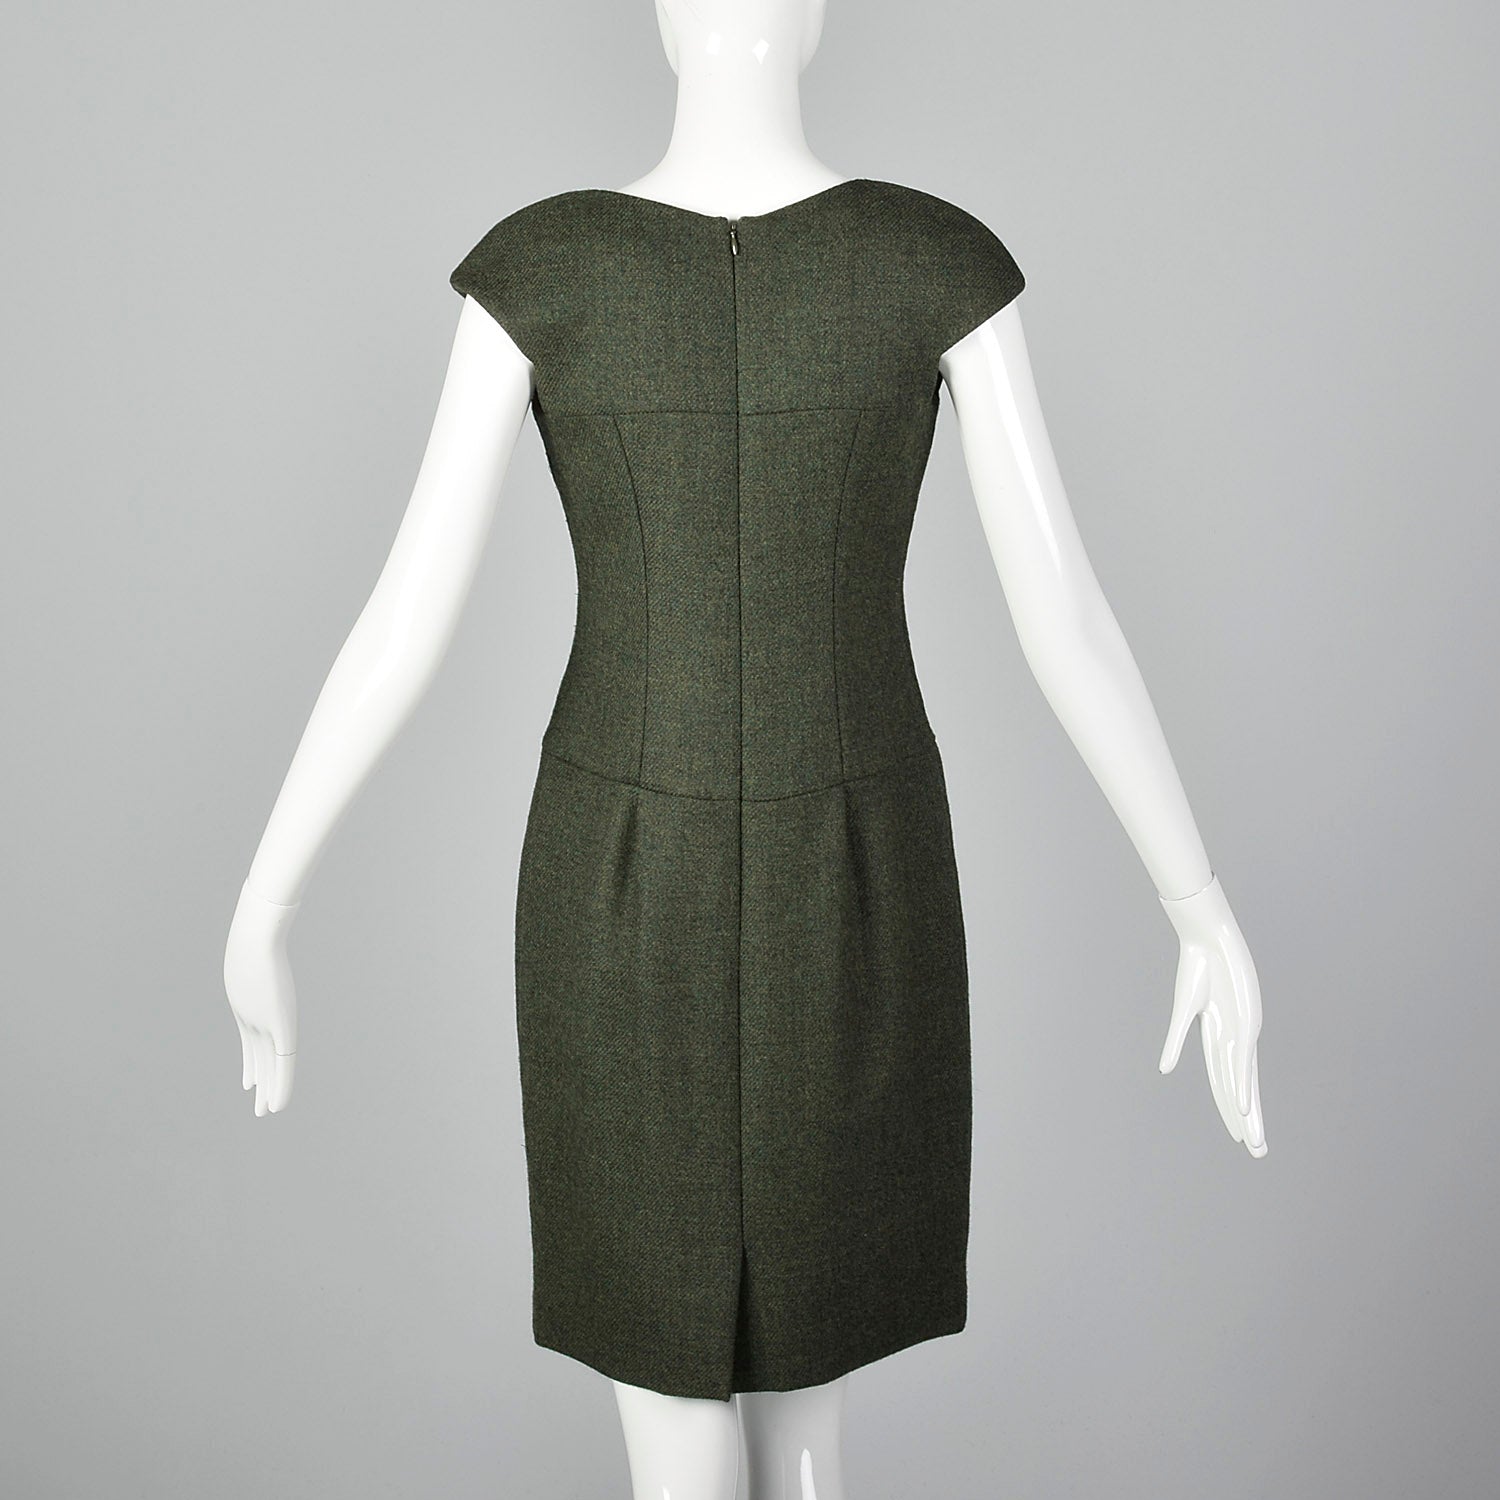 Classic Green Wool Dress by Norman Ambrose